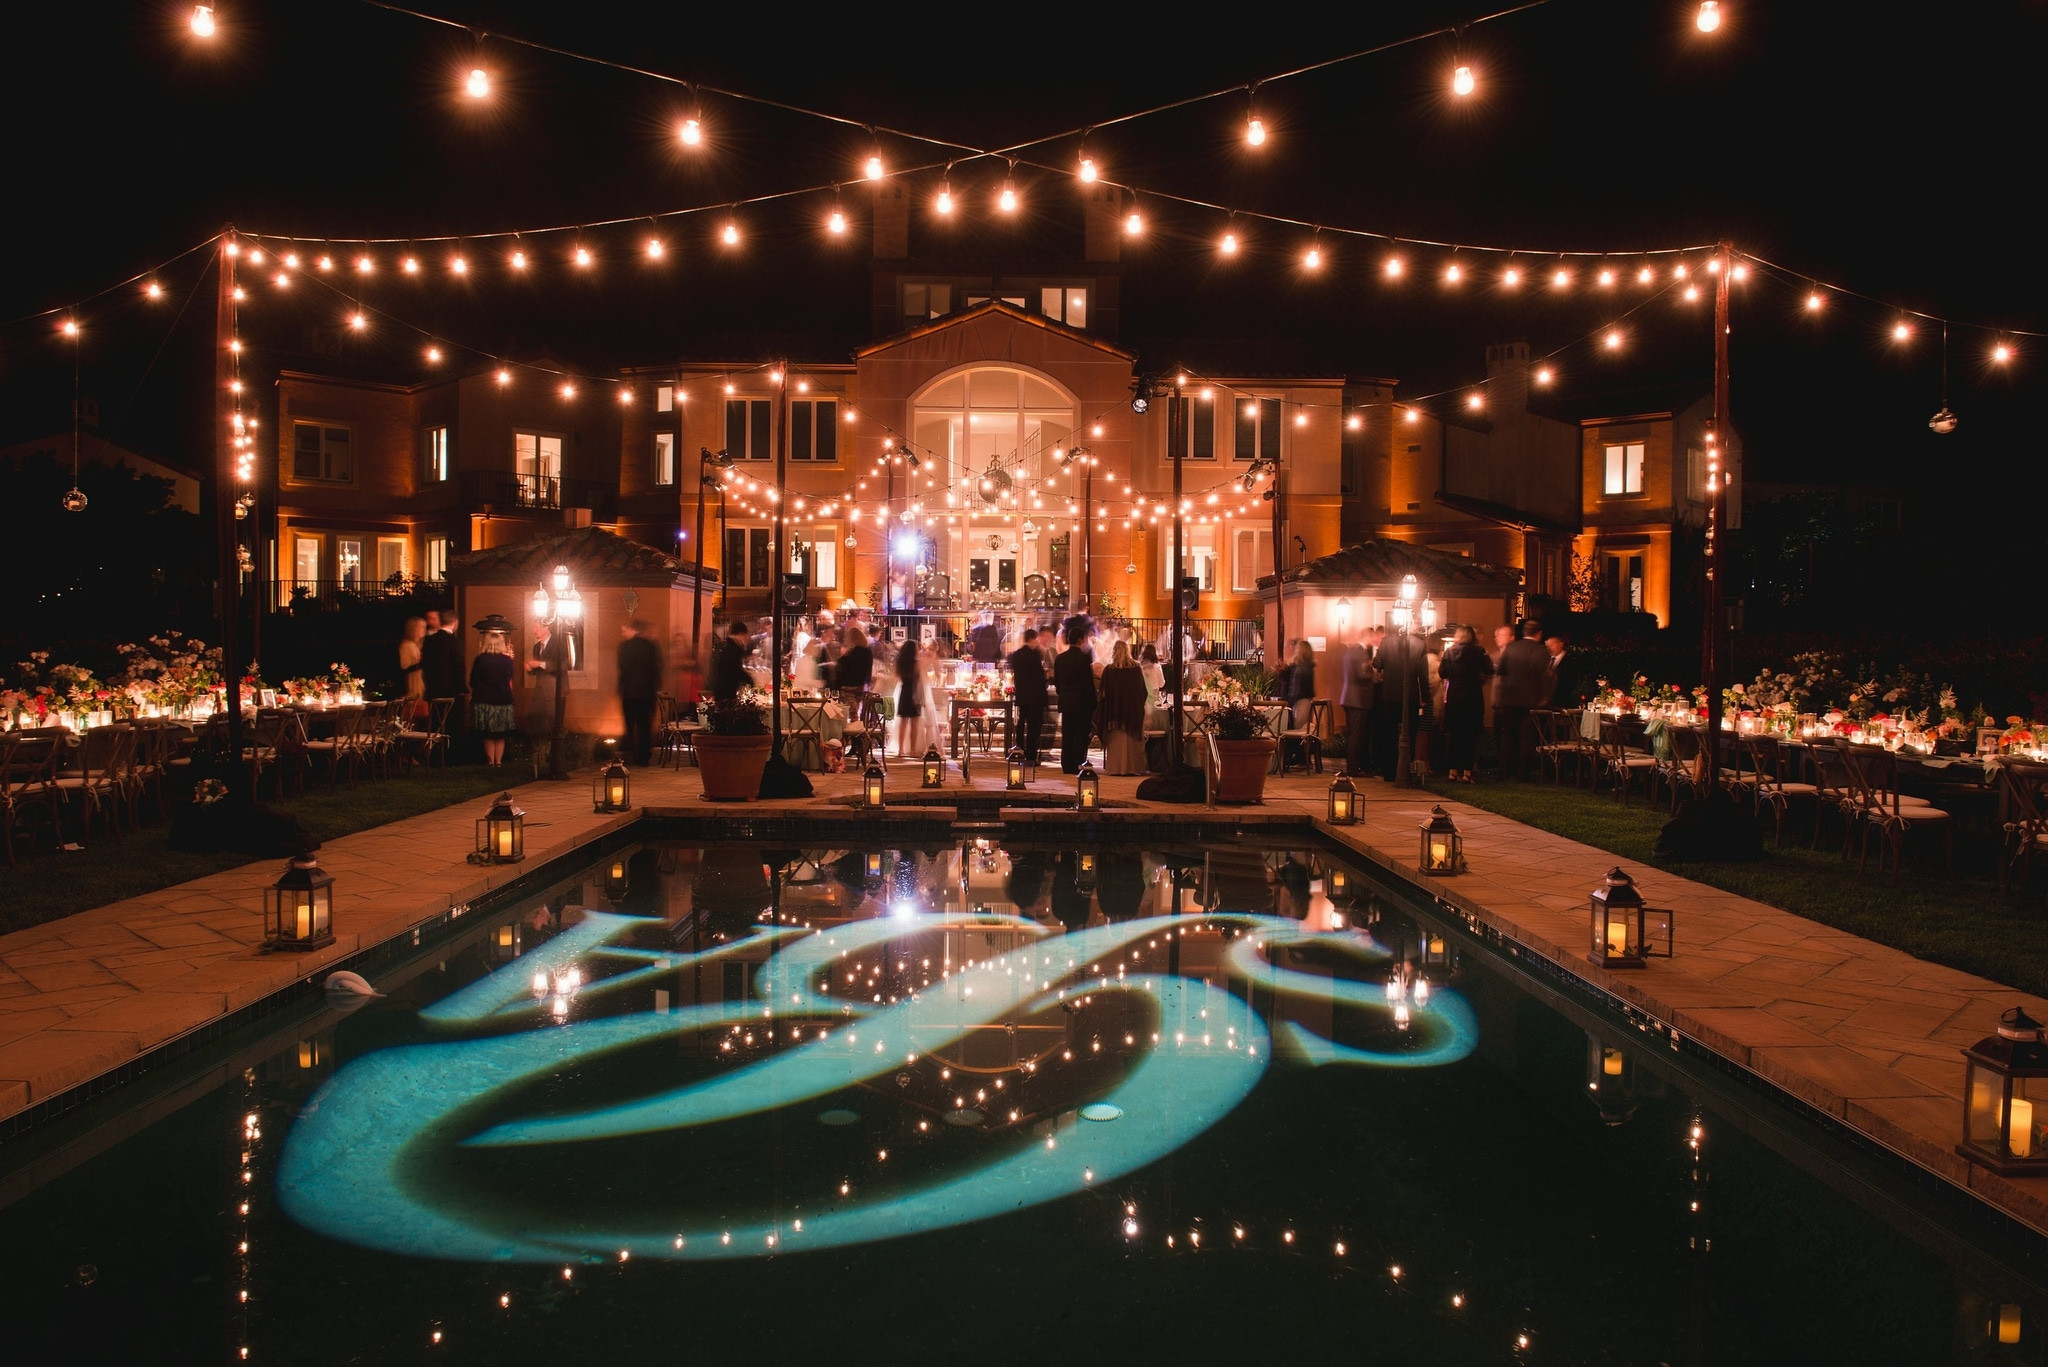 Night Pool Party Ideas
 12 Essential Pool Party Ideas for Your Mid Summer Soirée